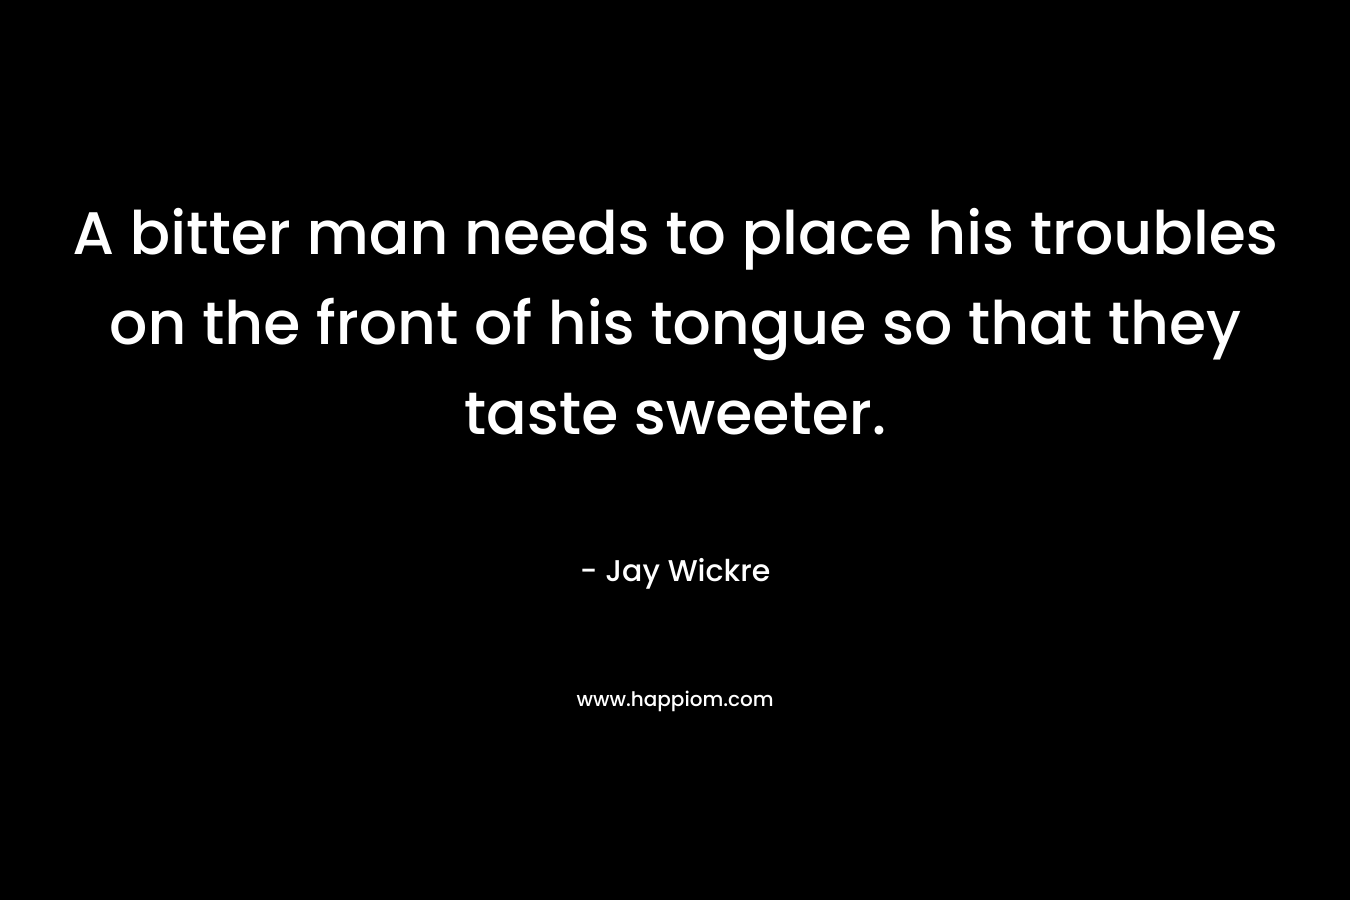 A bitter man needs to place his troubles on the front of his tongue so that they taste sweeter. – Jay Wickre